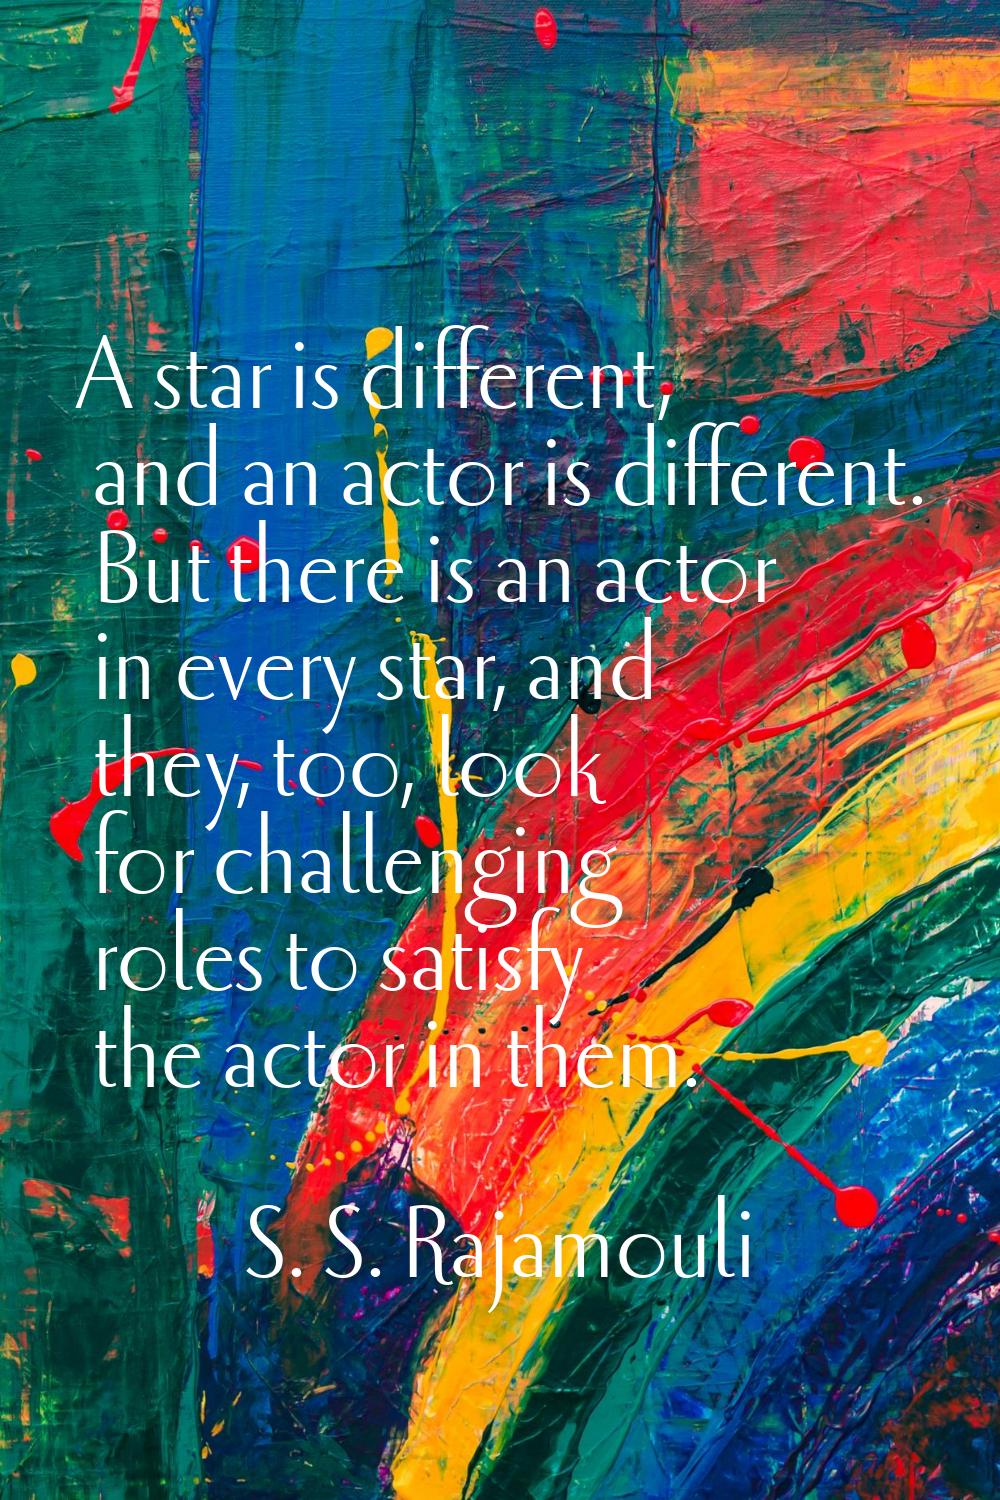 A star is different, and an actor is different. But there is an actor in every star, and they, too,